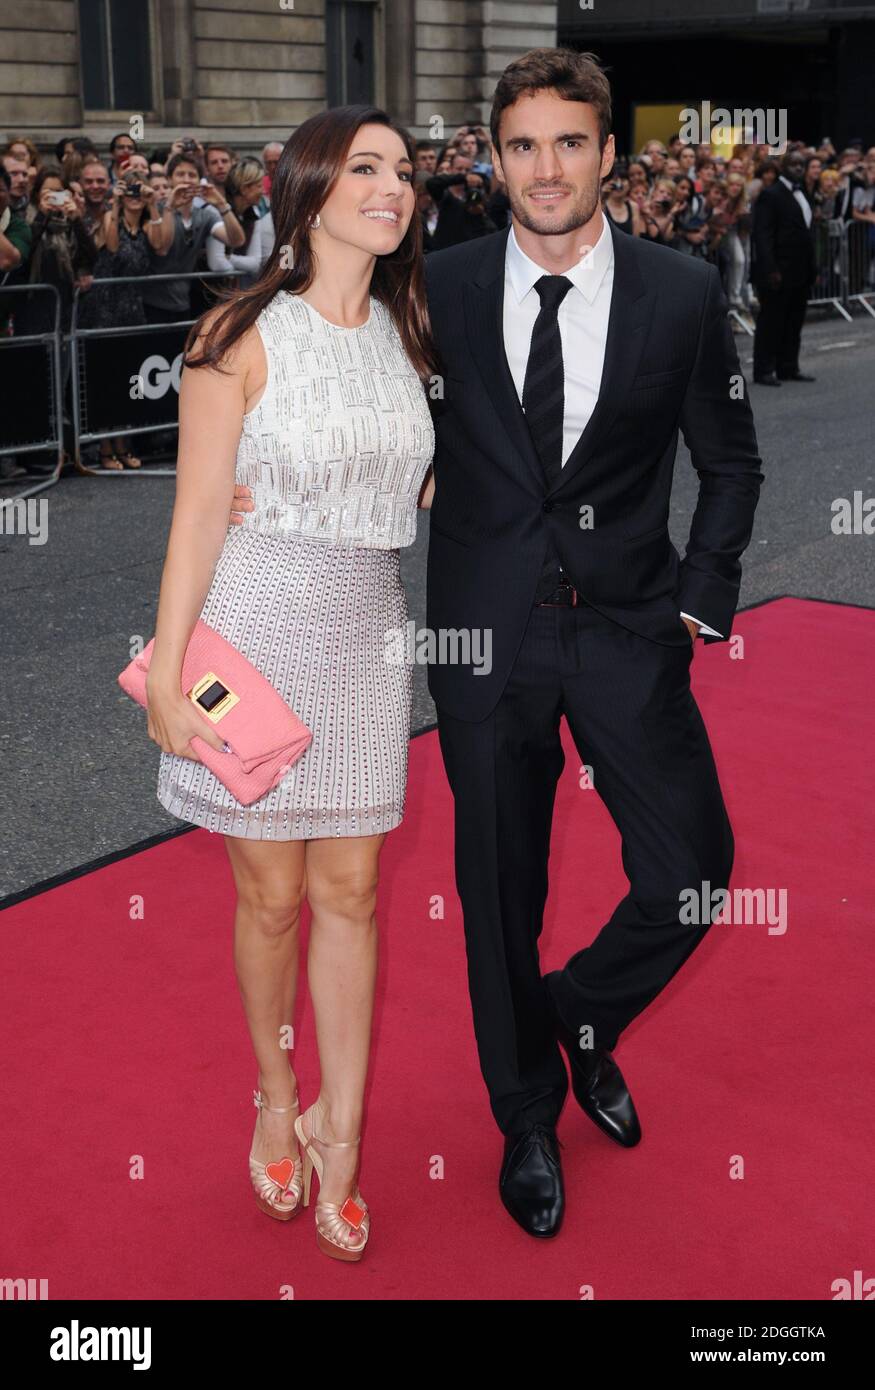 Kelly Brook and Thom Evans arriving at The GQ Men of the Year Awards, Royal Opera House, London. Stock Photo